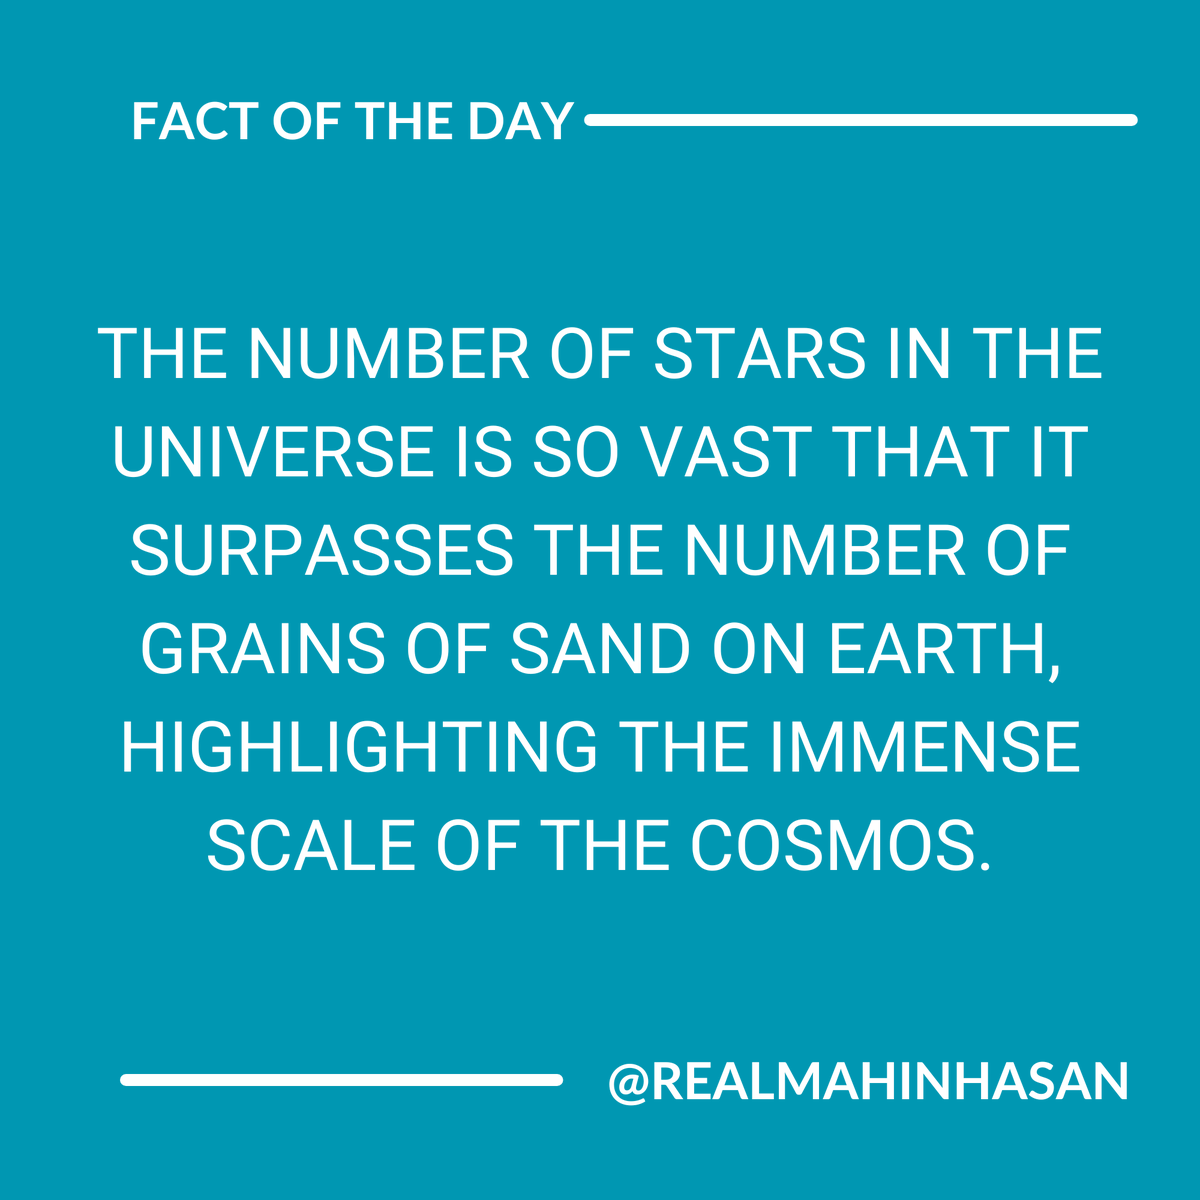 There are more stars in the universe than grains of sand on Earth. #SpaceFacts #InfiniteWonders